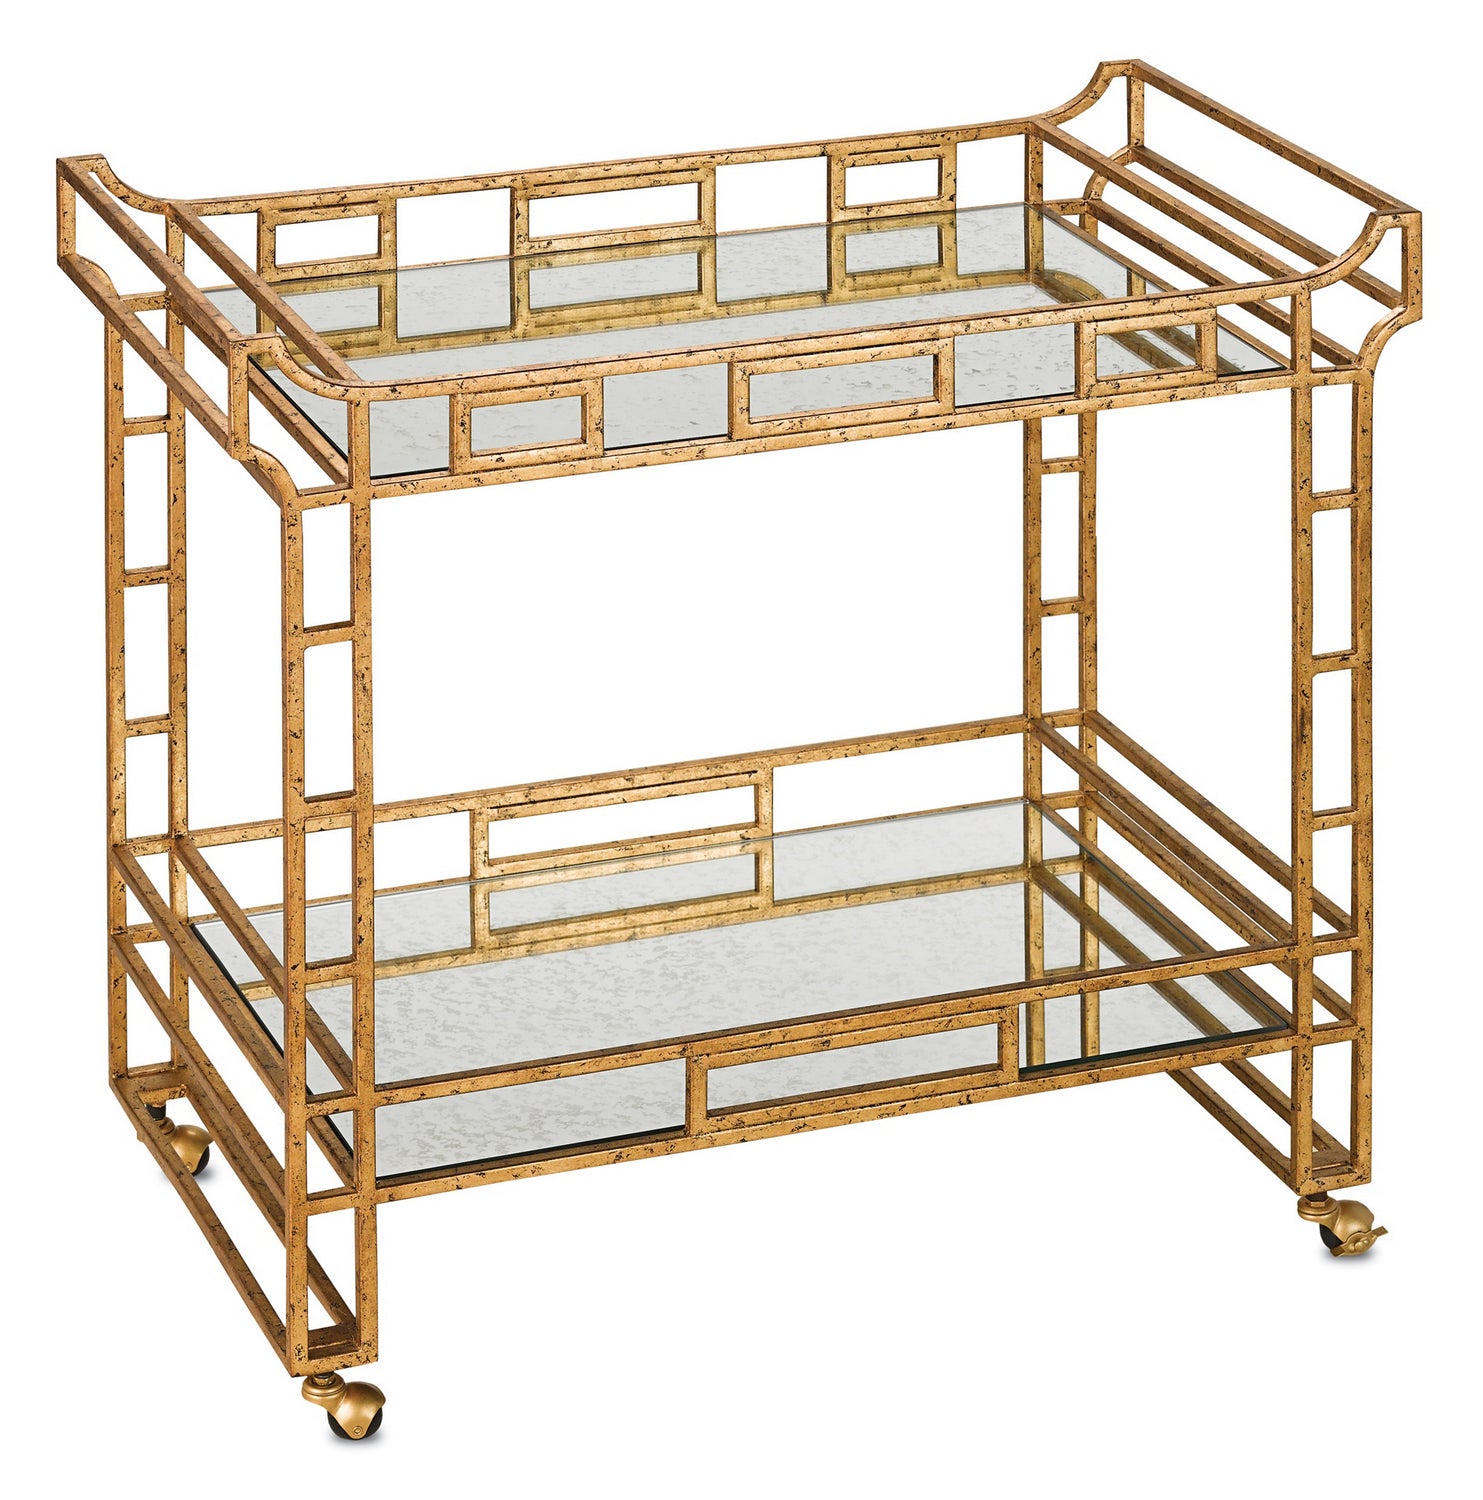 Bar Cart from the Odeon collection in Seneca Gold Leaf/Light Roche Antique Mirror finish